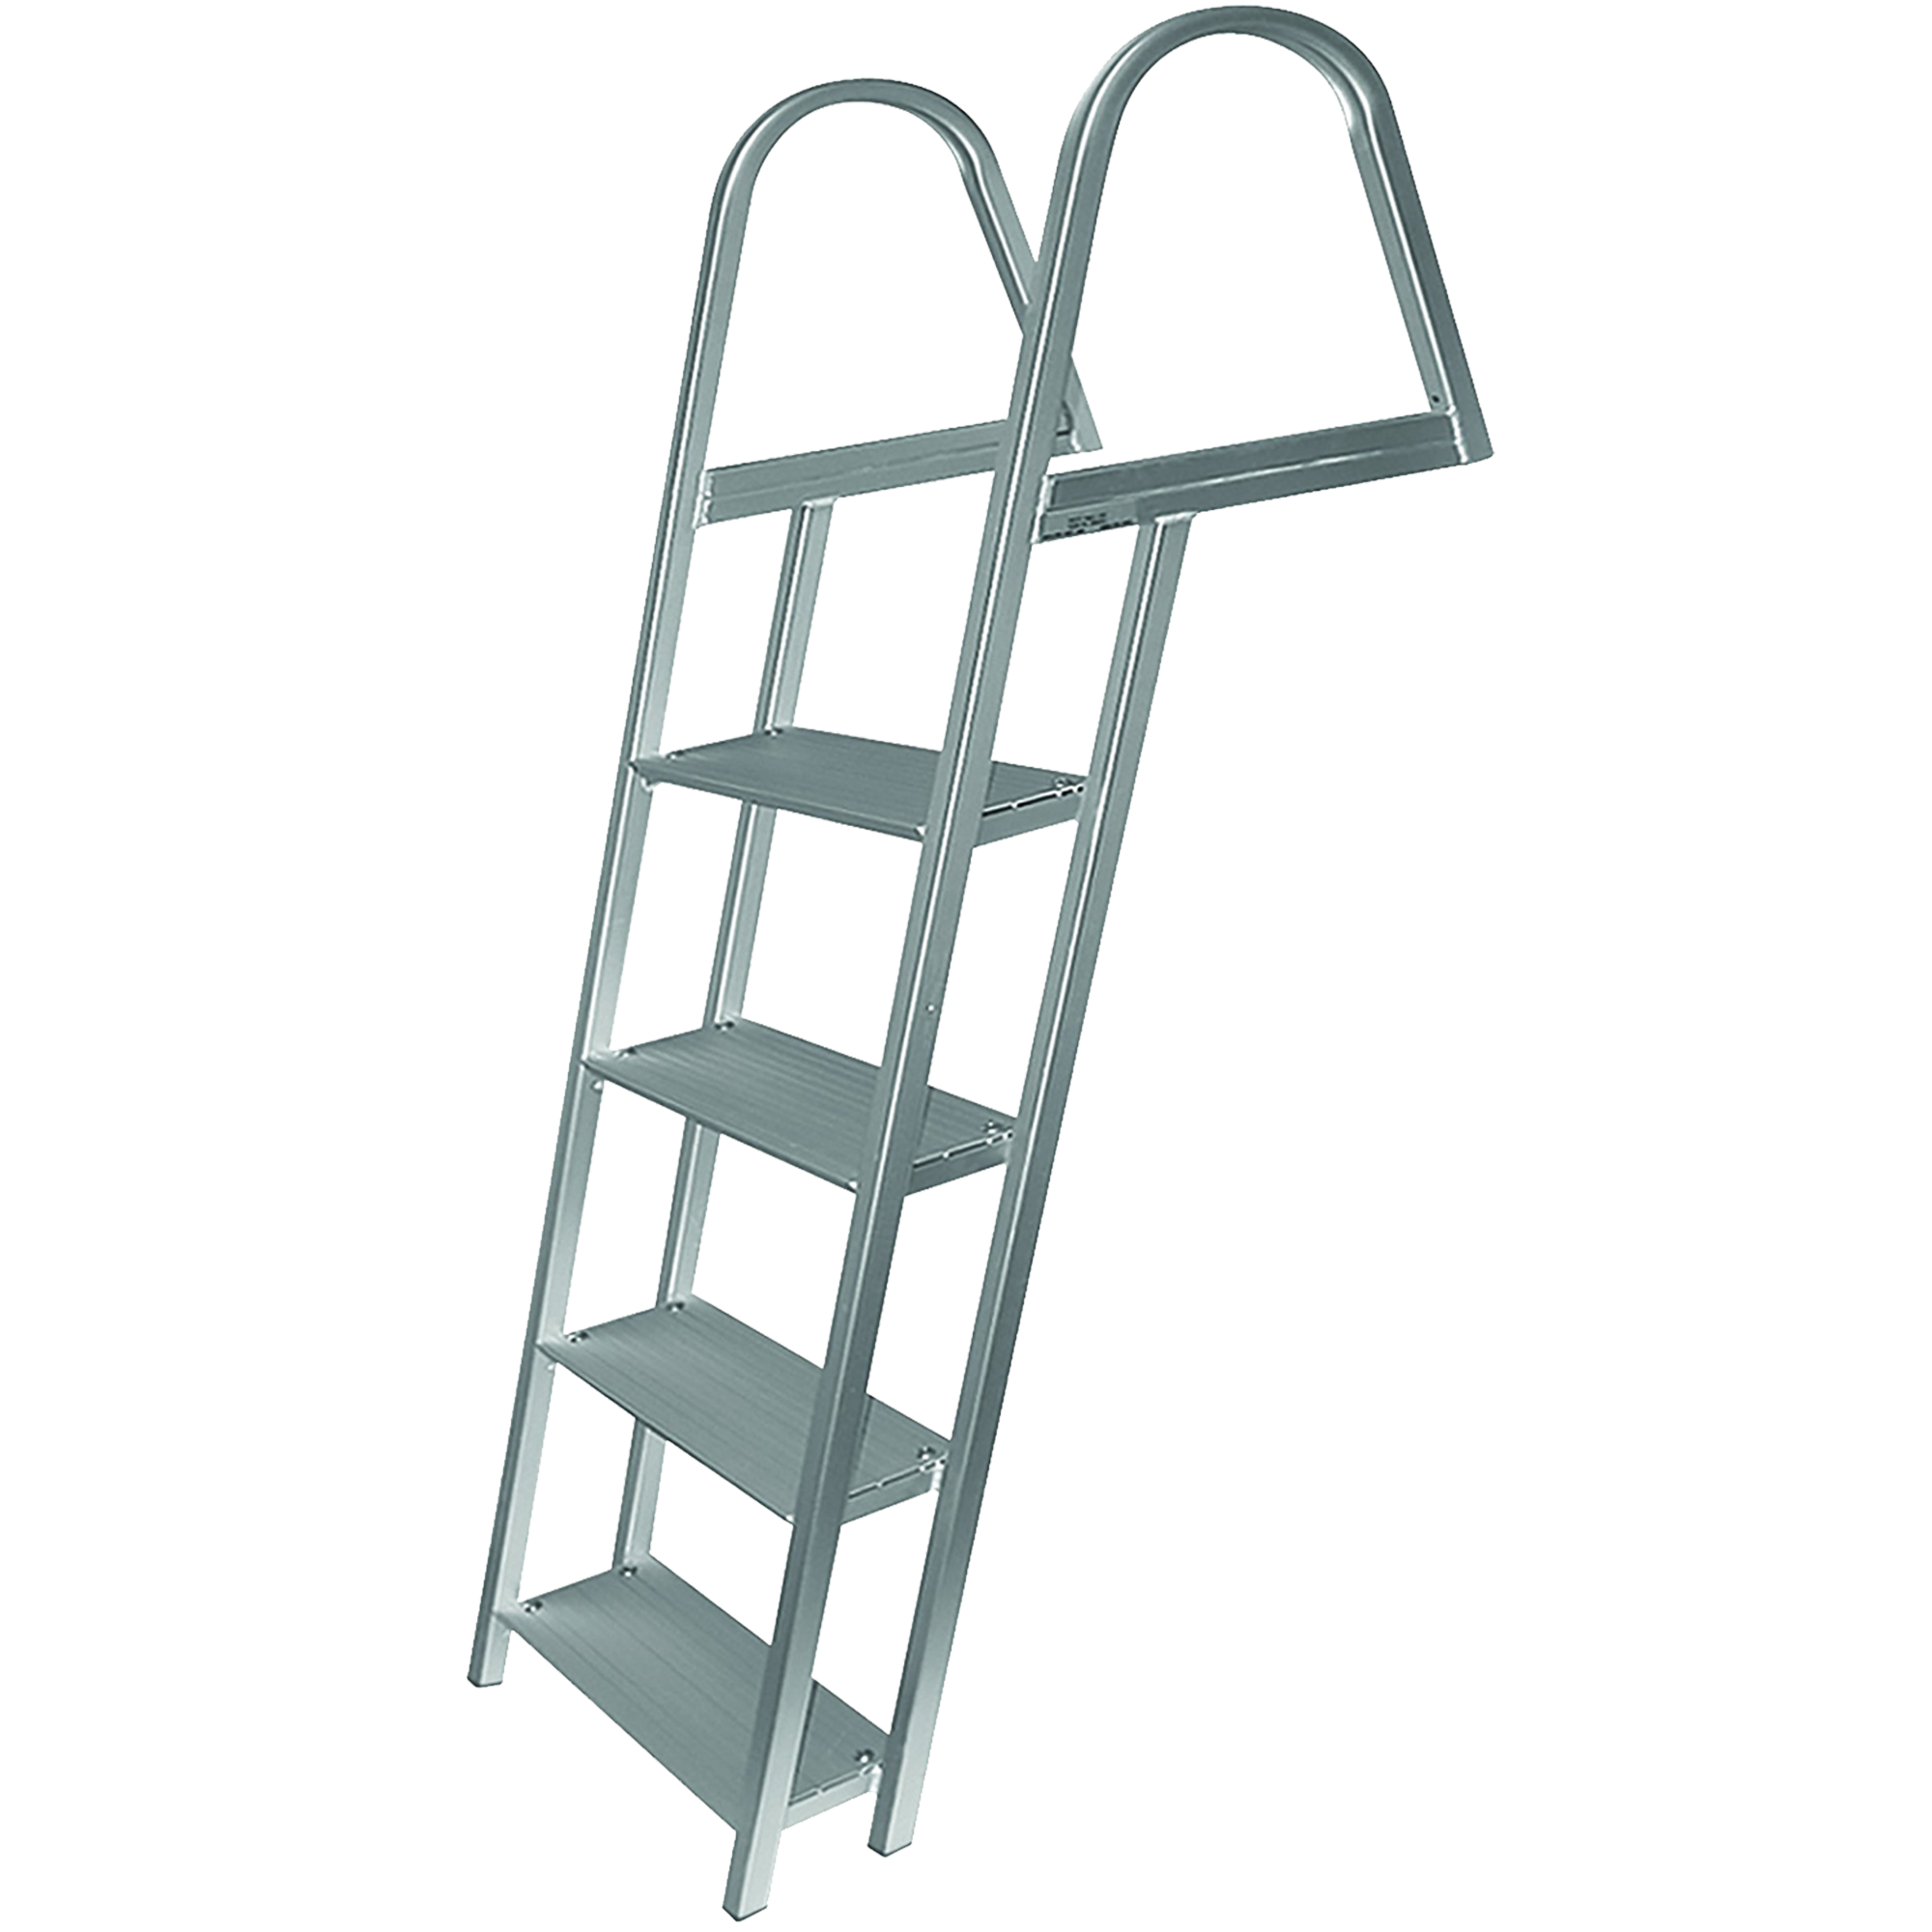 4-Step Angled Ladder with Mounting Hardware